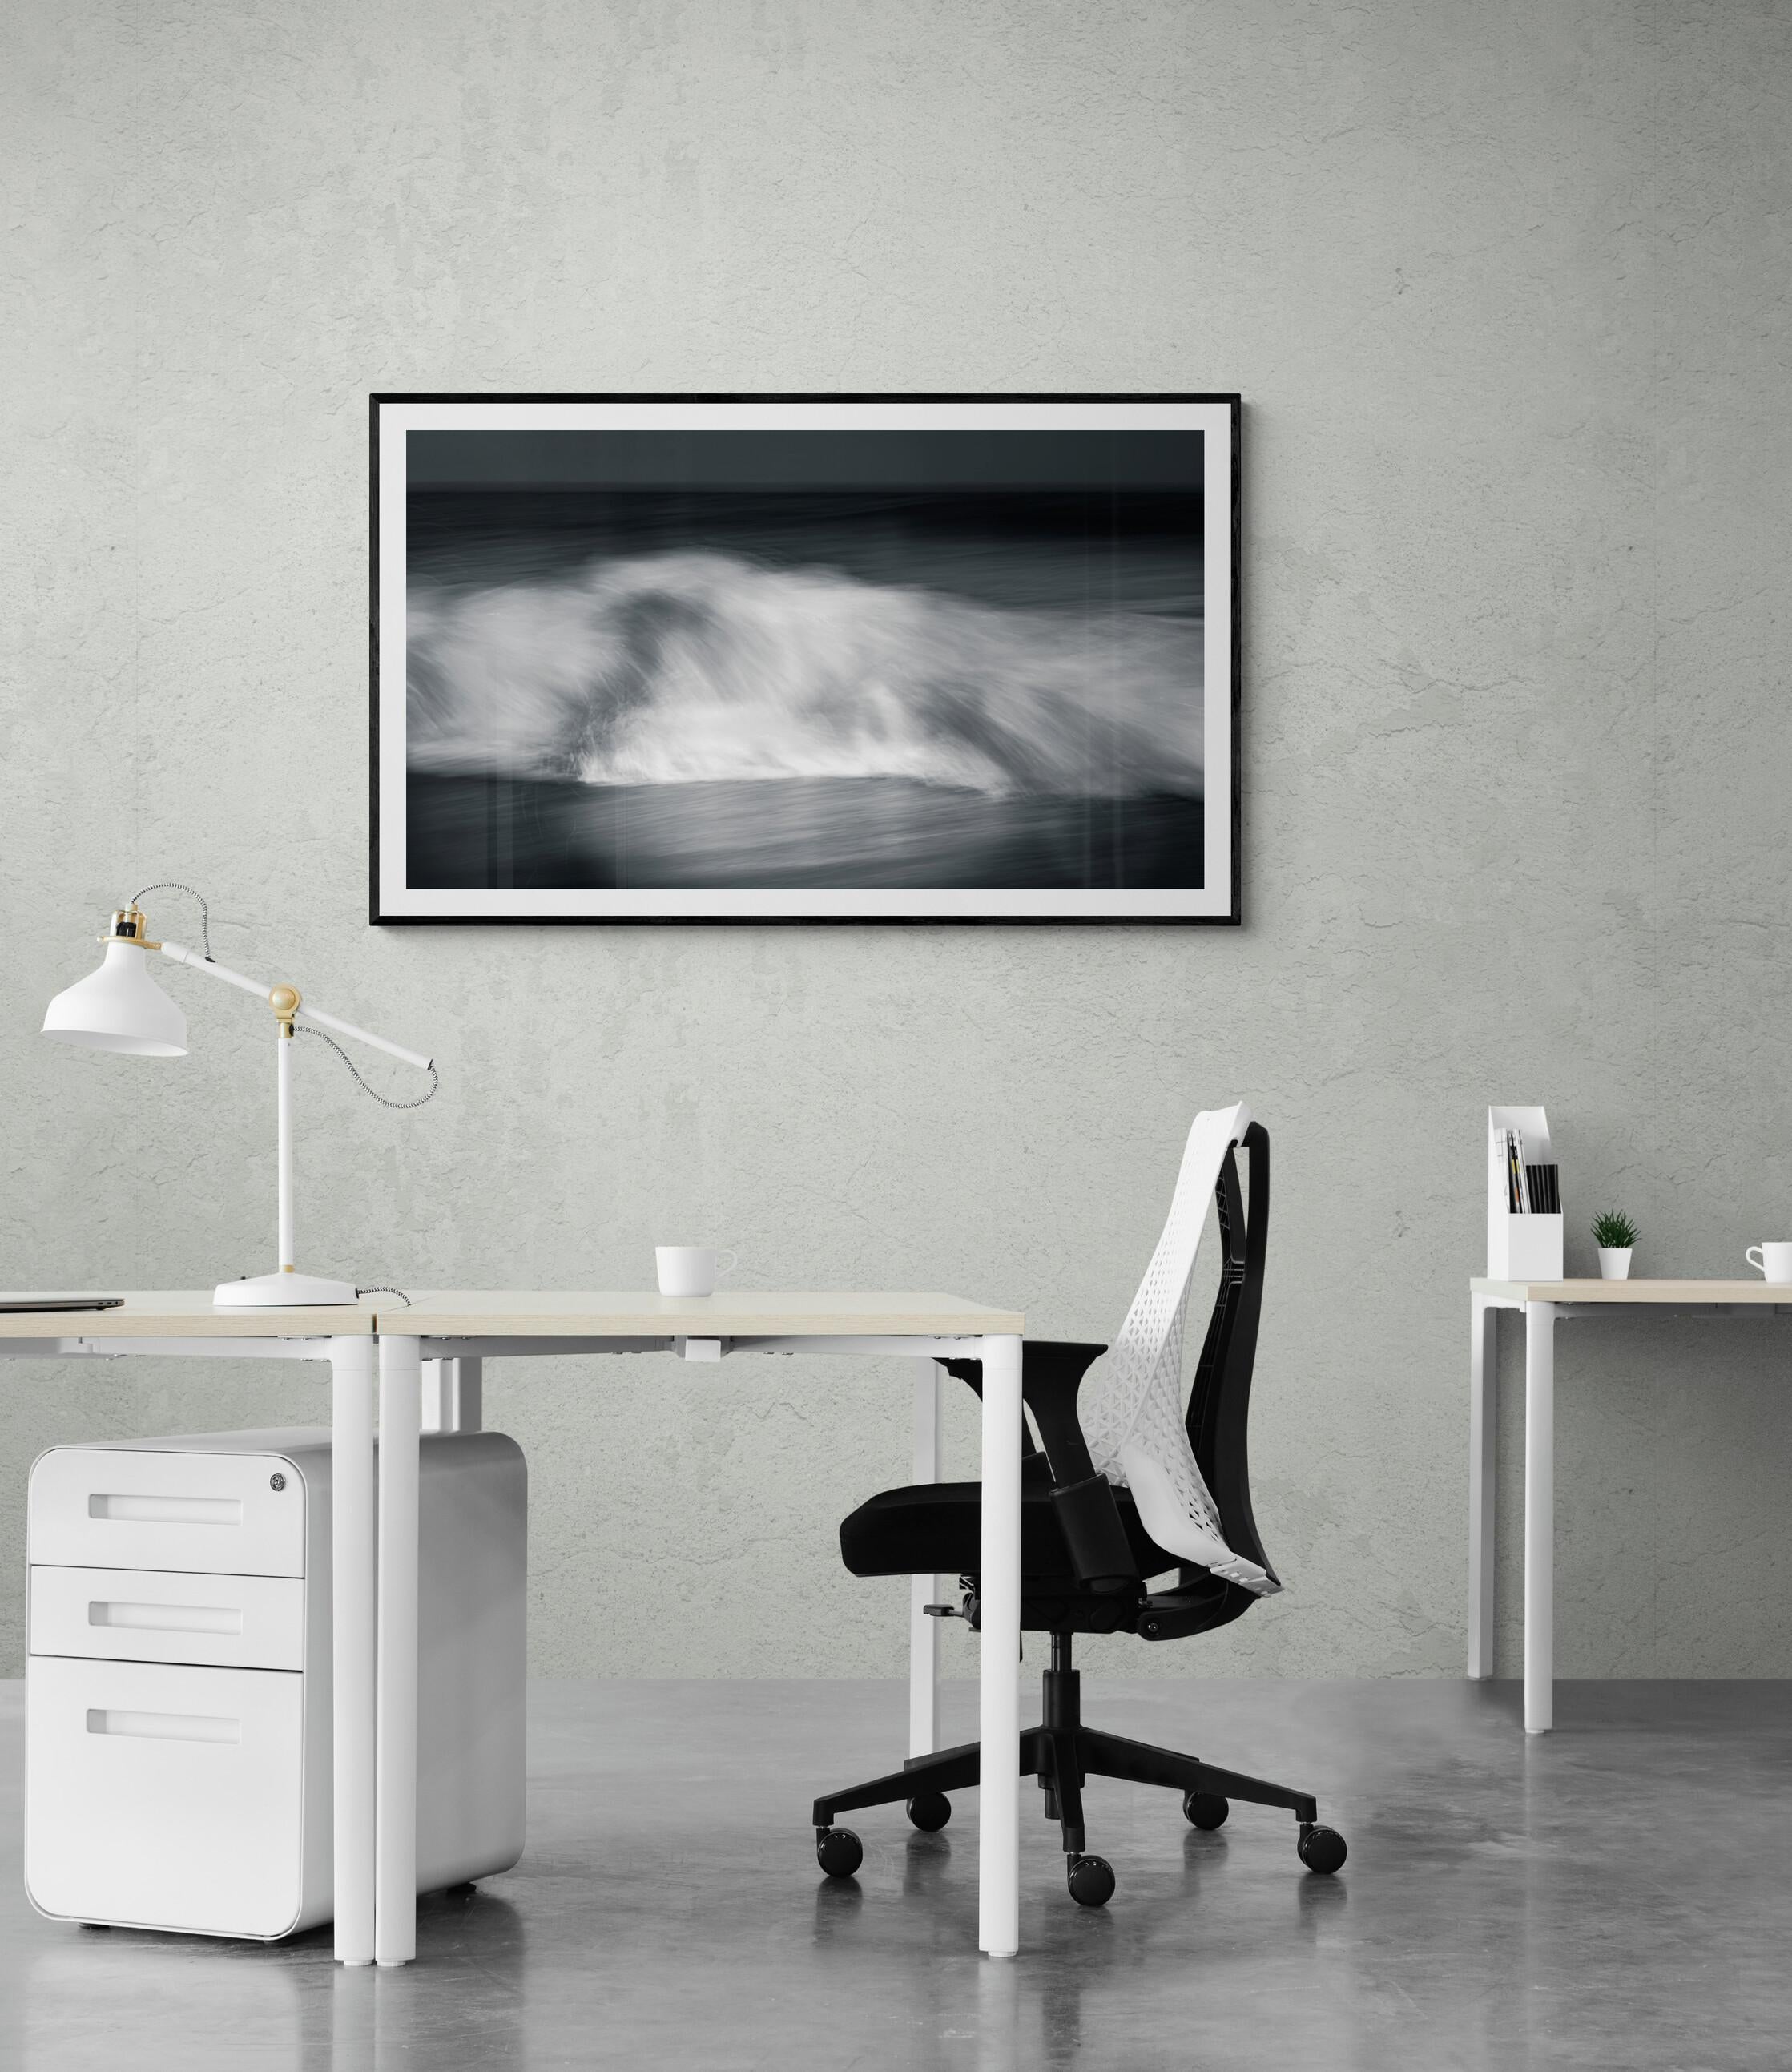 Limited Edition 1 / 7 B & W 20 x 24 Photograph Seascape - Kinetic #37 For Sale 2